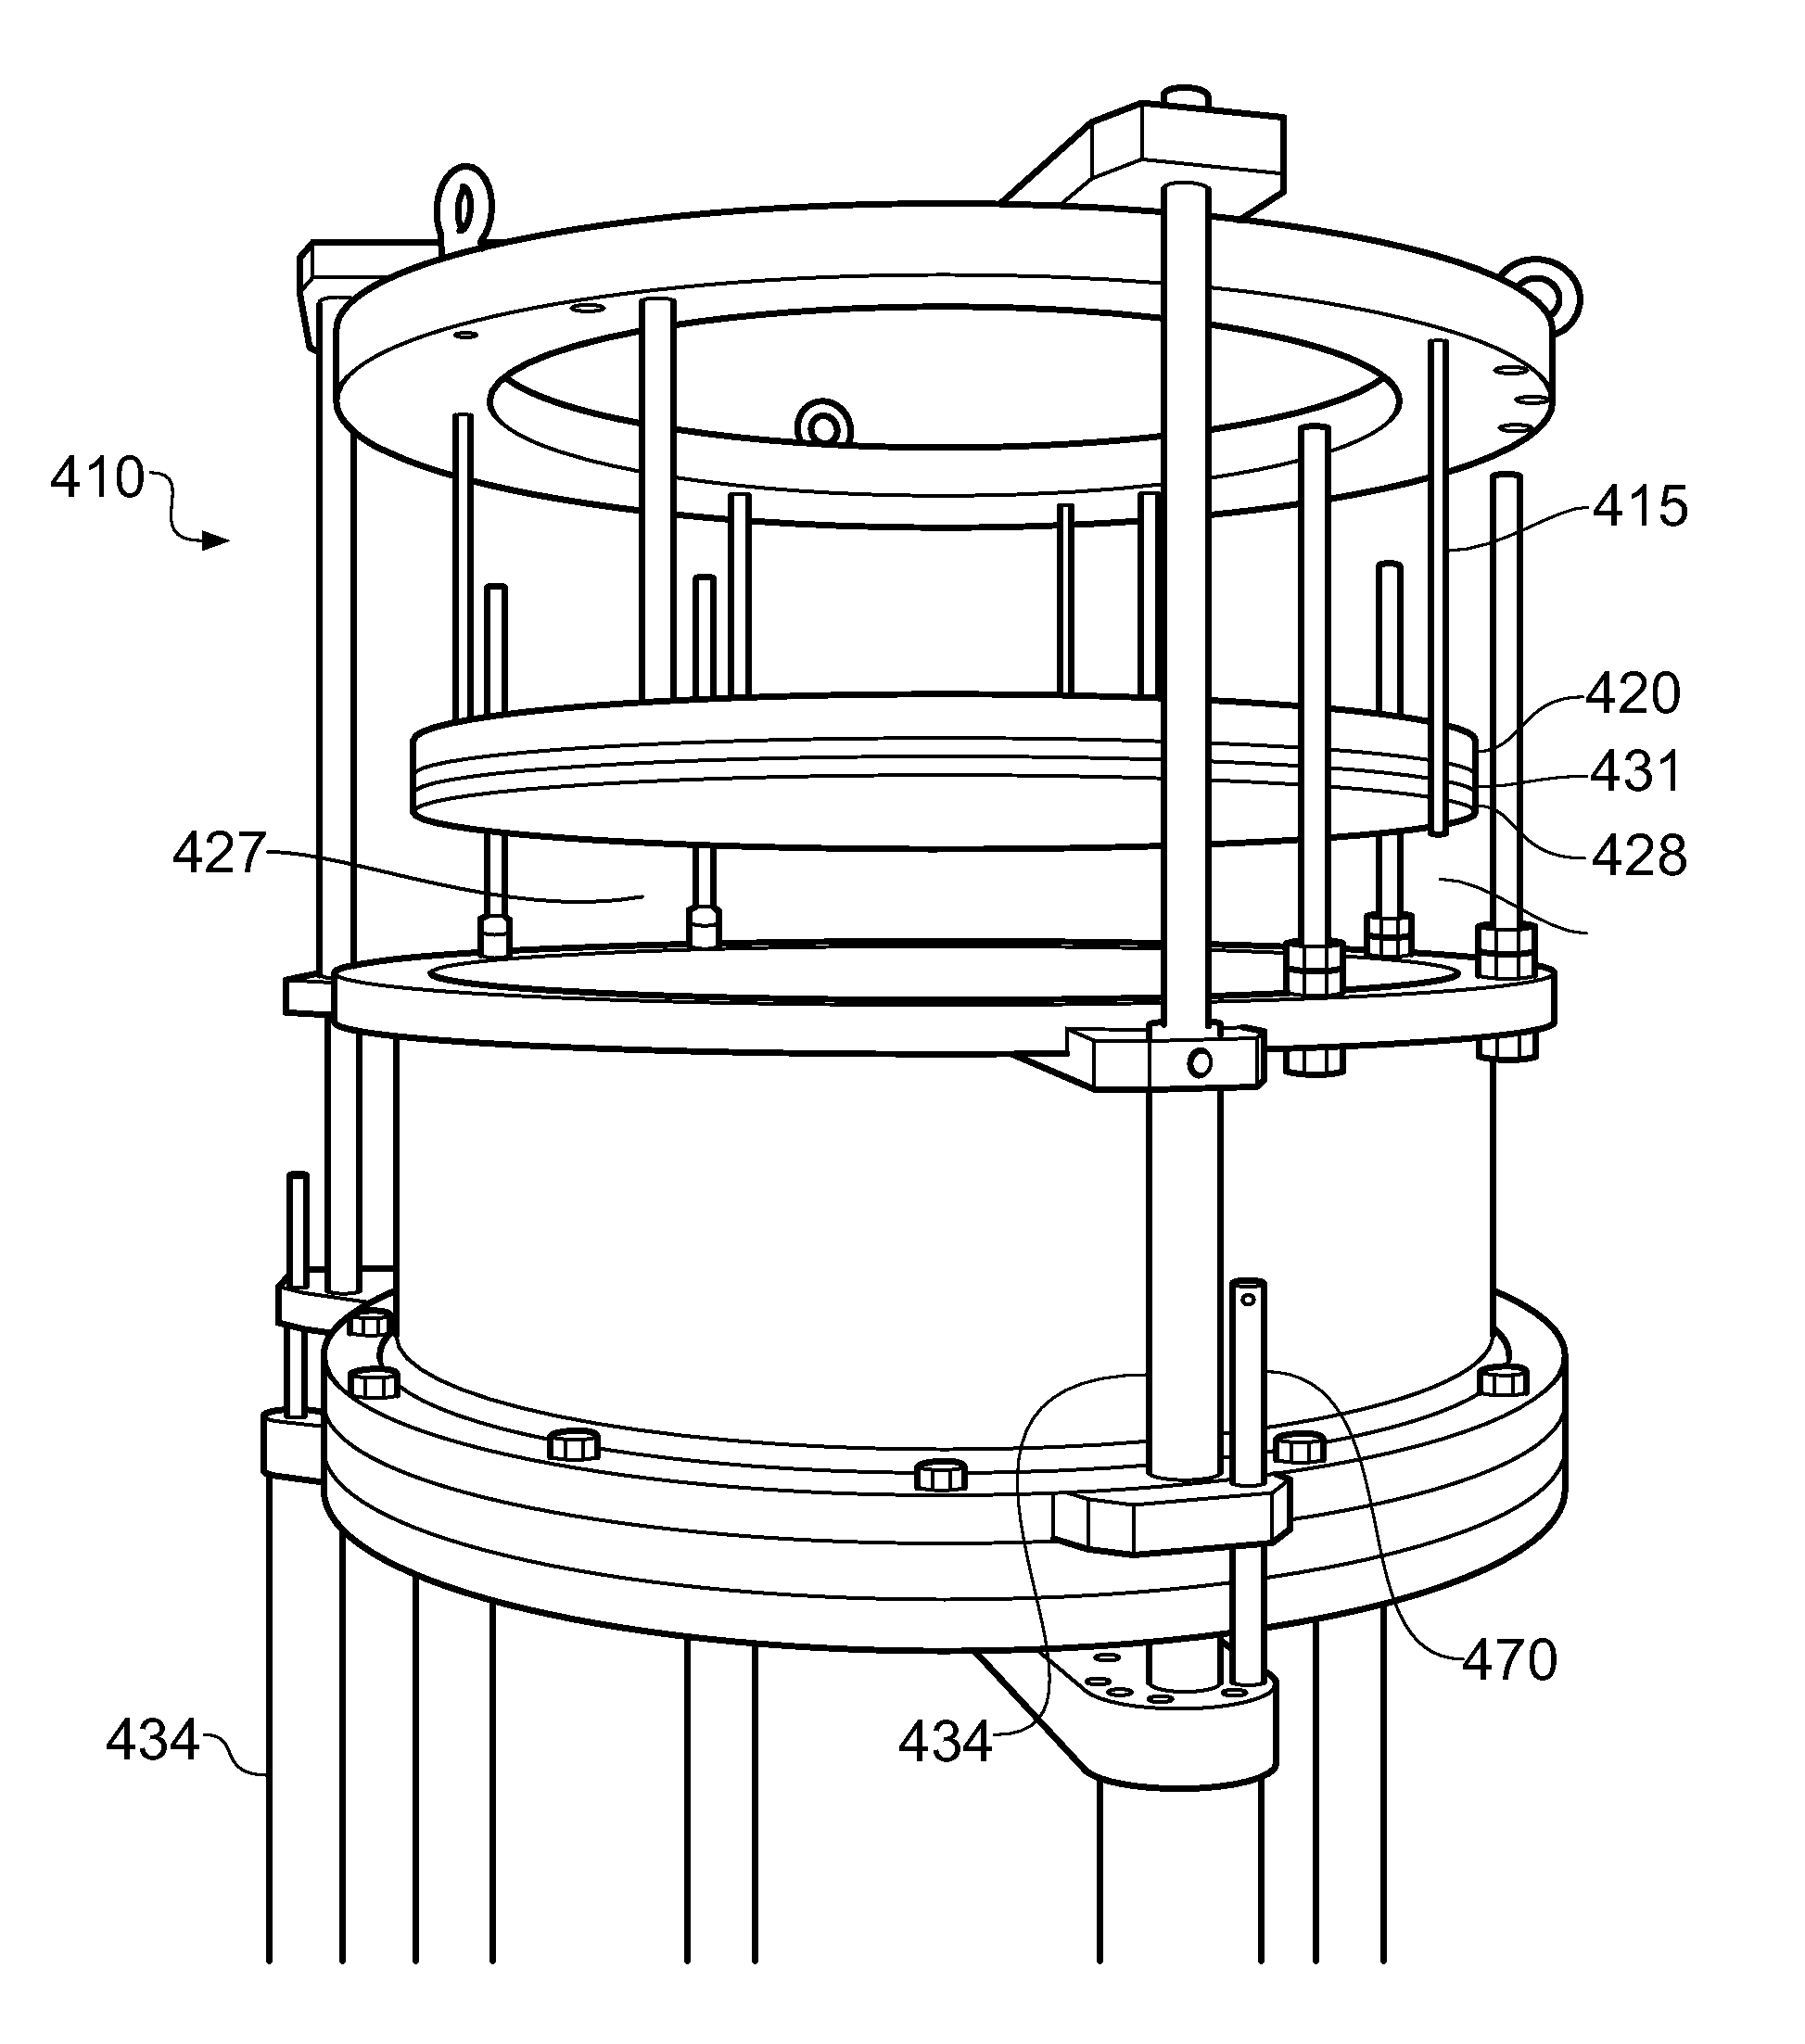 Method for conducting maintenance on a chromatography column